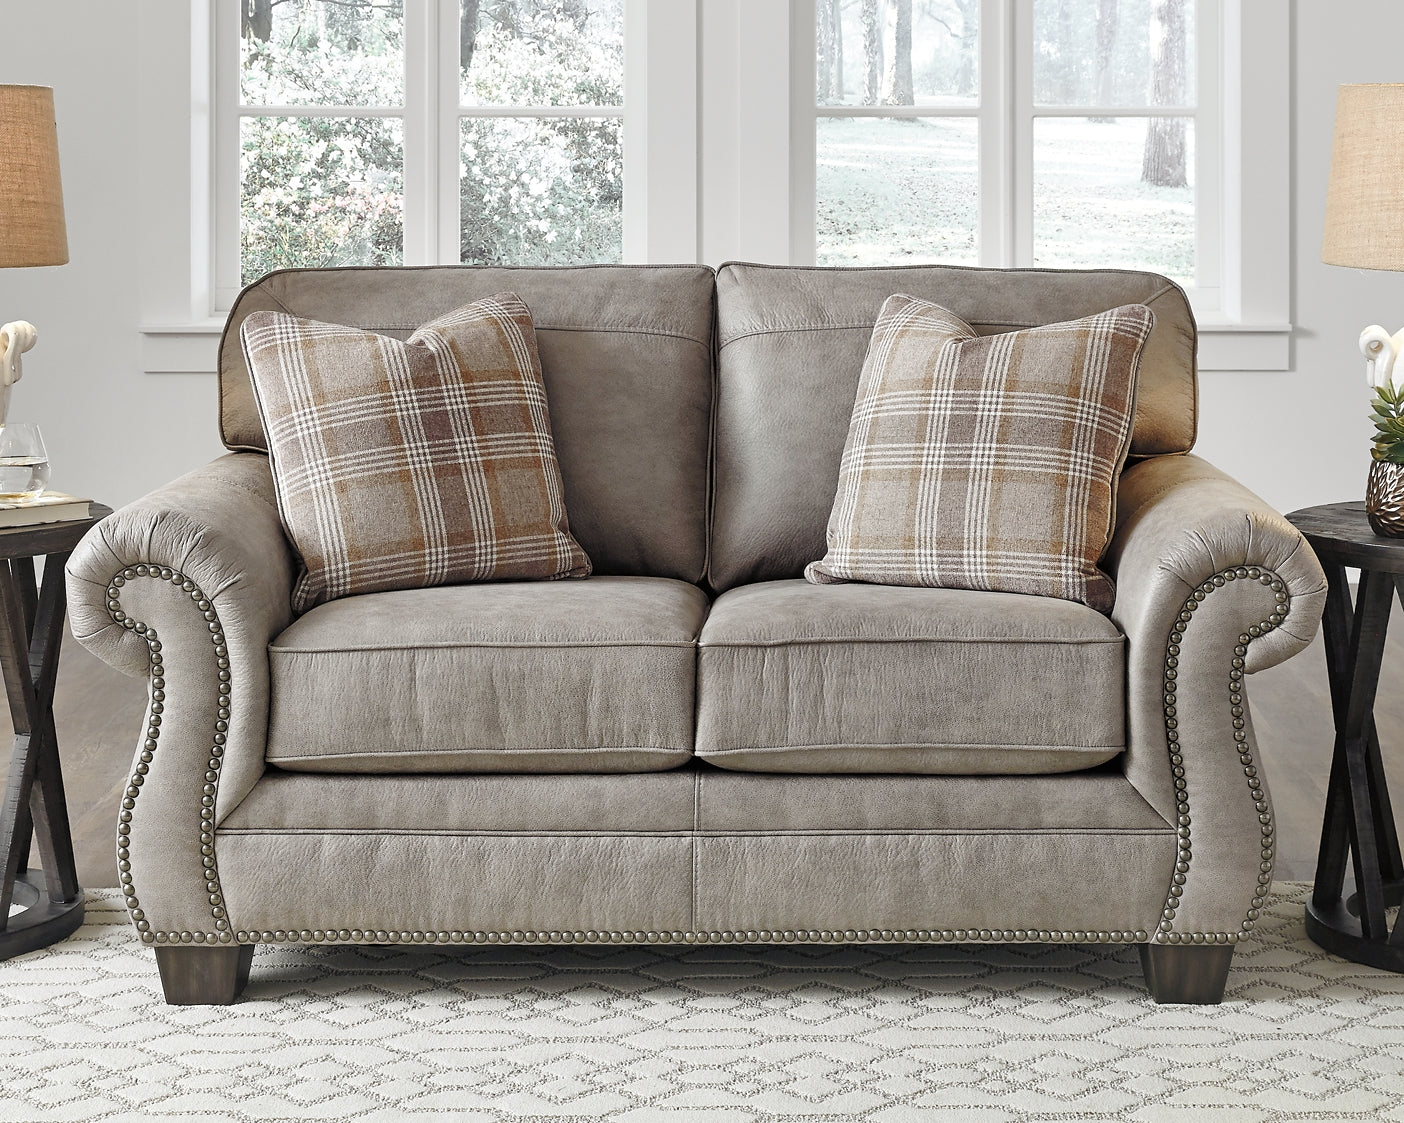 Olsberg Sofa, Loveseat, Chair and Ottoman at Walker Mattress and Furniture Locations in Cedar Park and Belton TX.